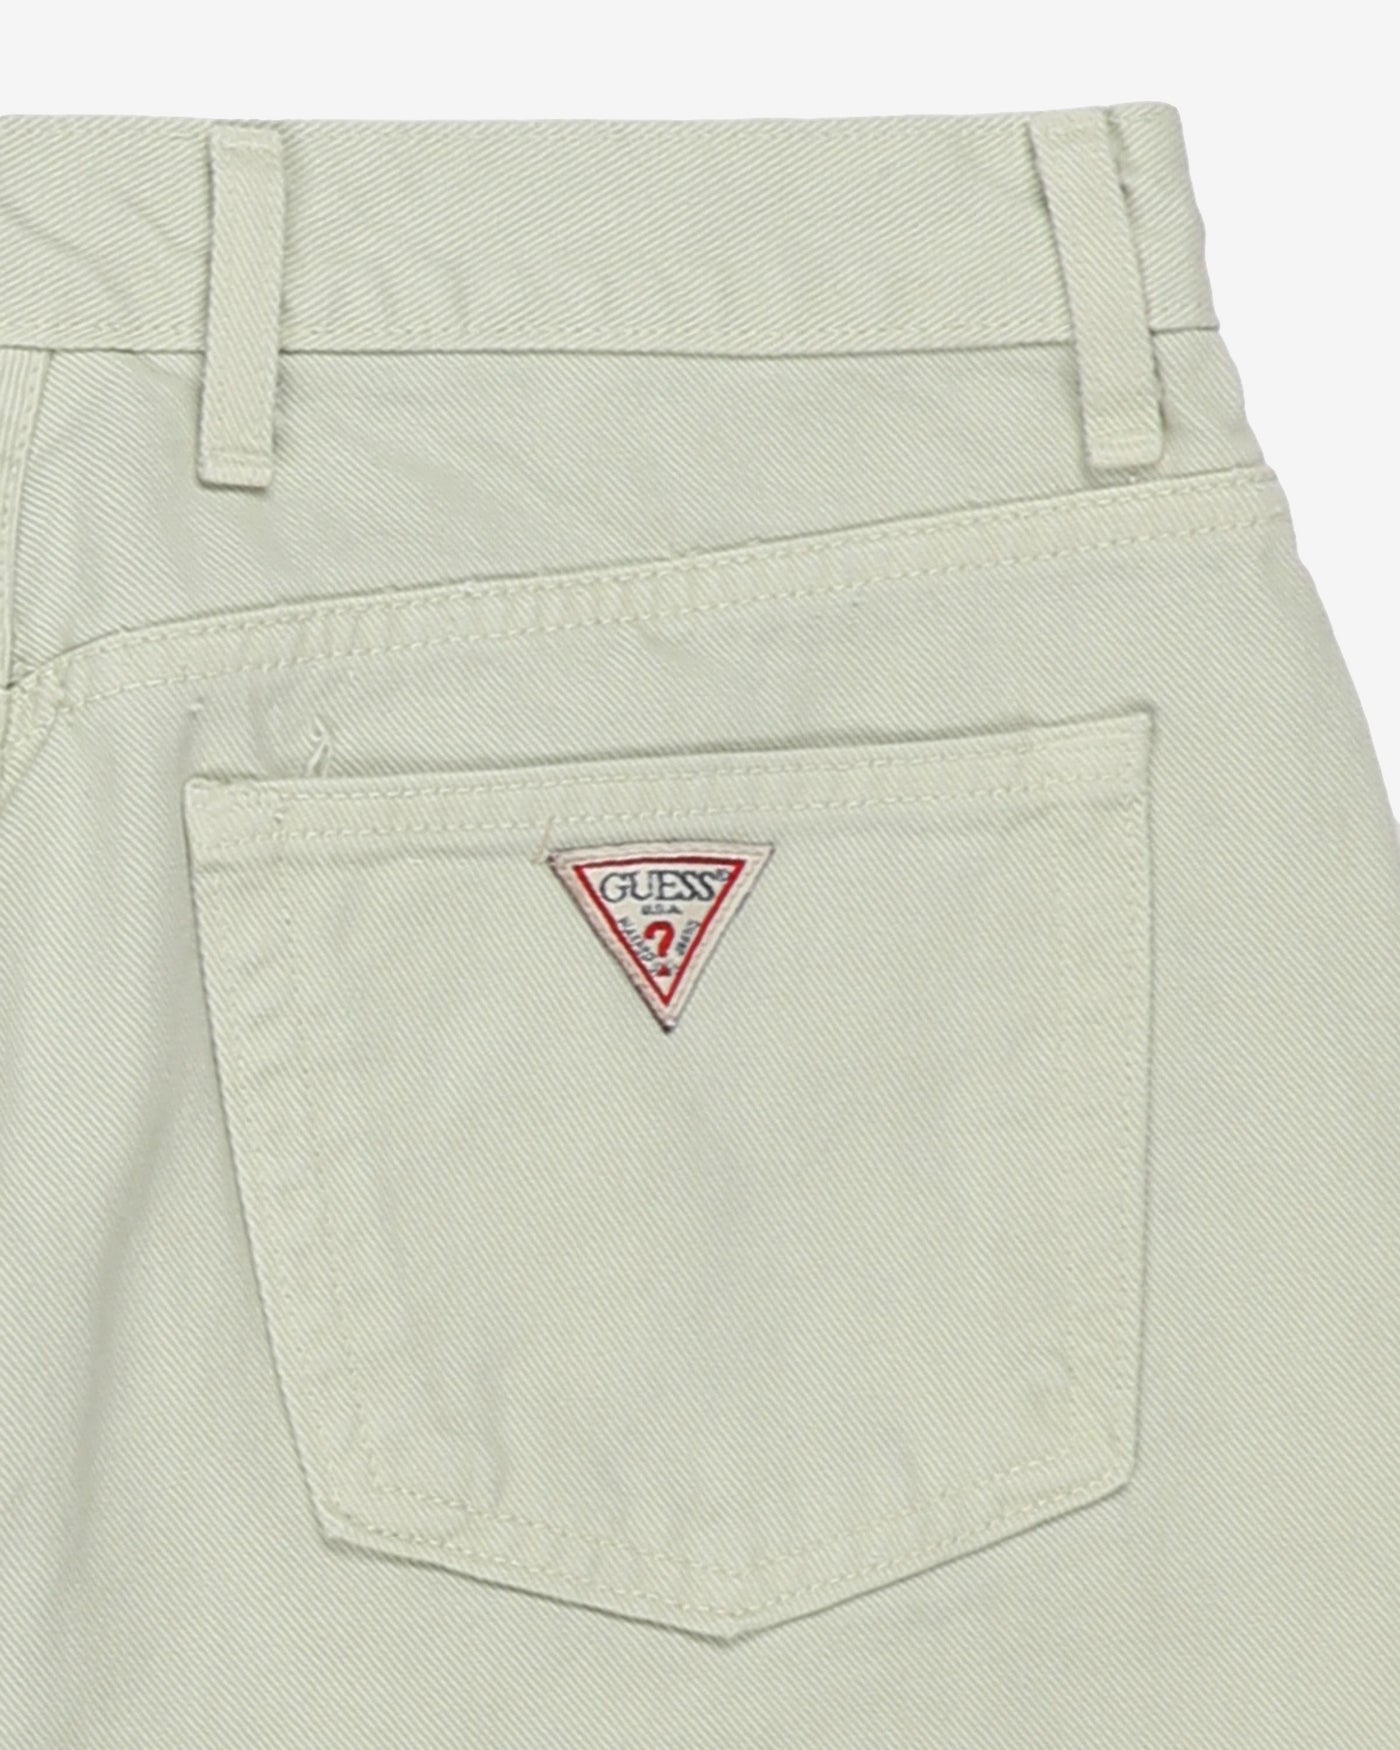 Vintage Made In USA Light Green Guess Jeans - W30 L25